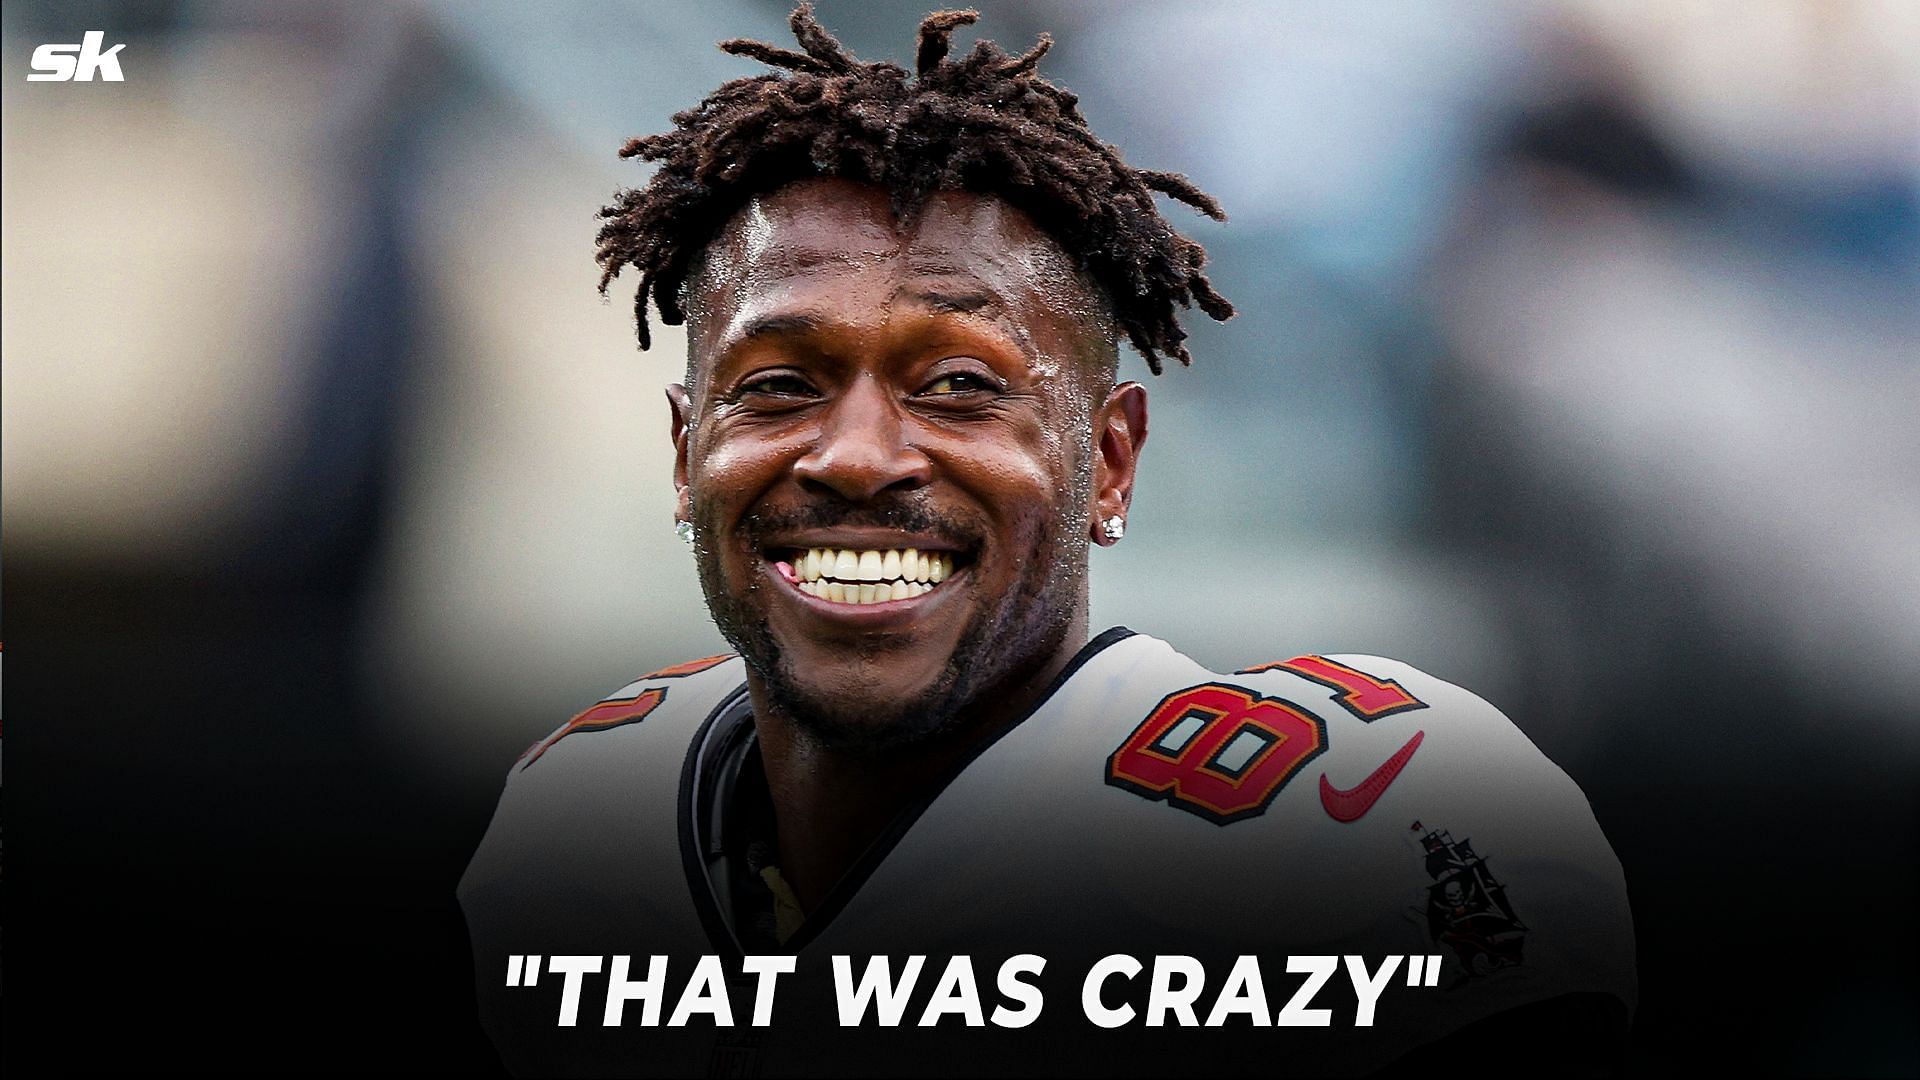 Antonio Brown shared the craziest rumor he has heard about himself